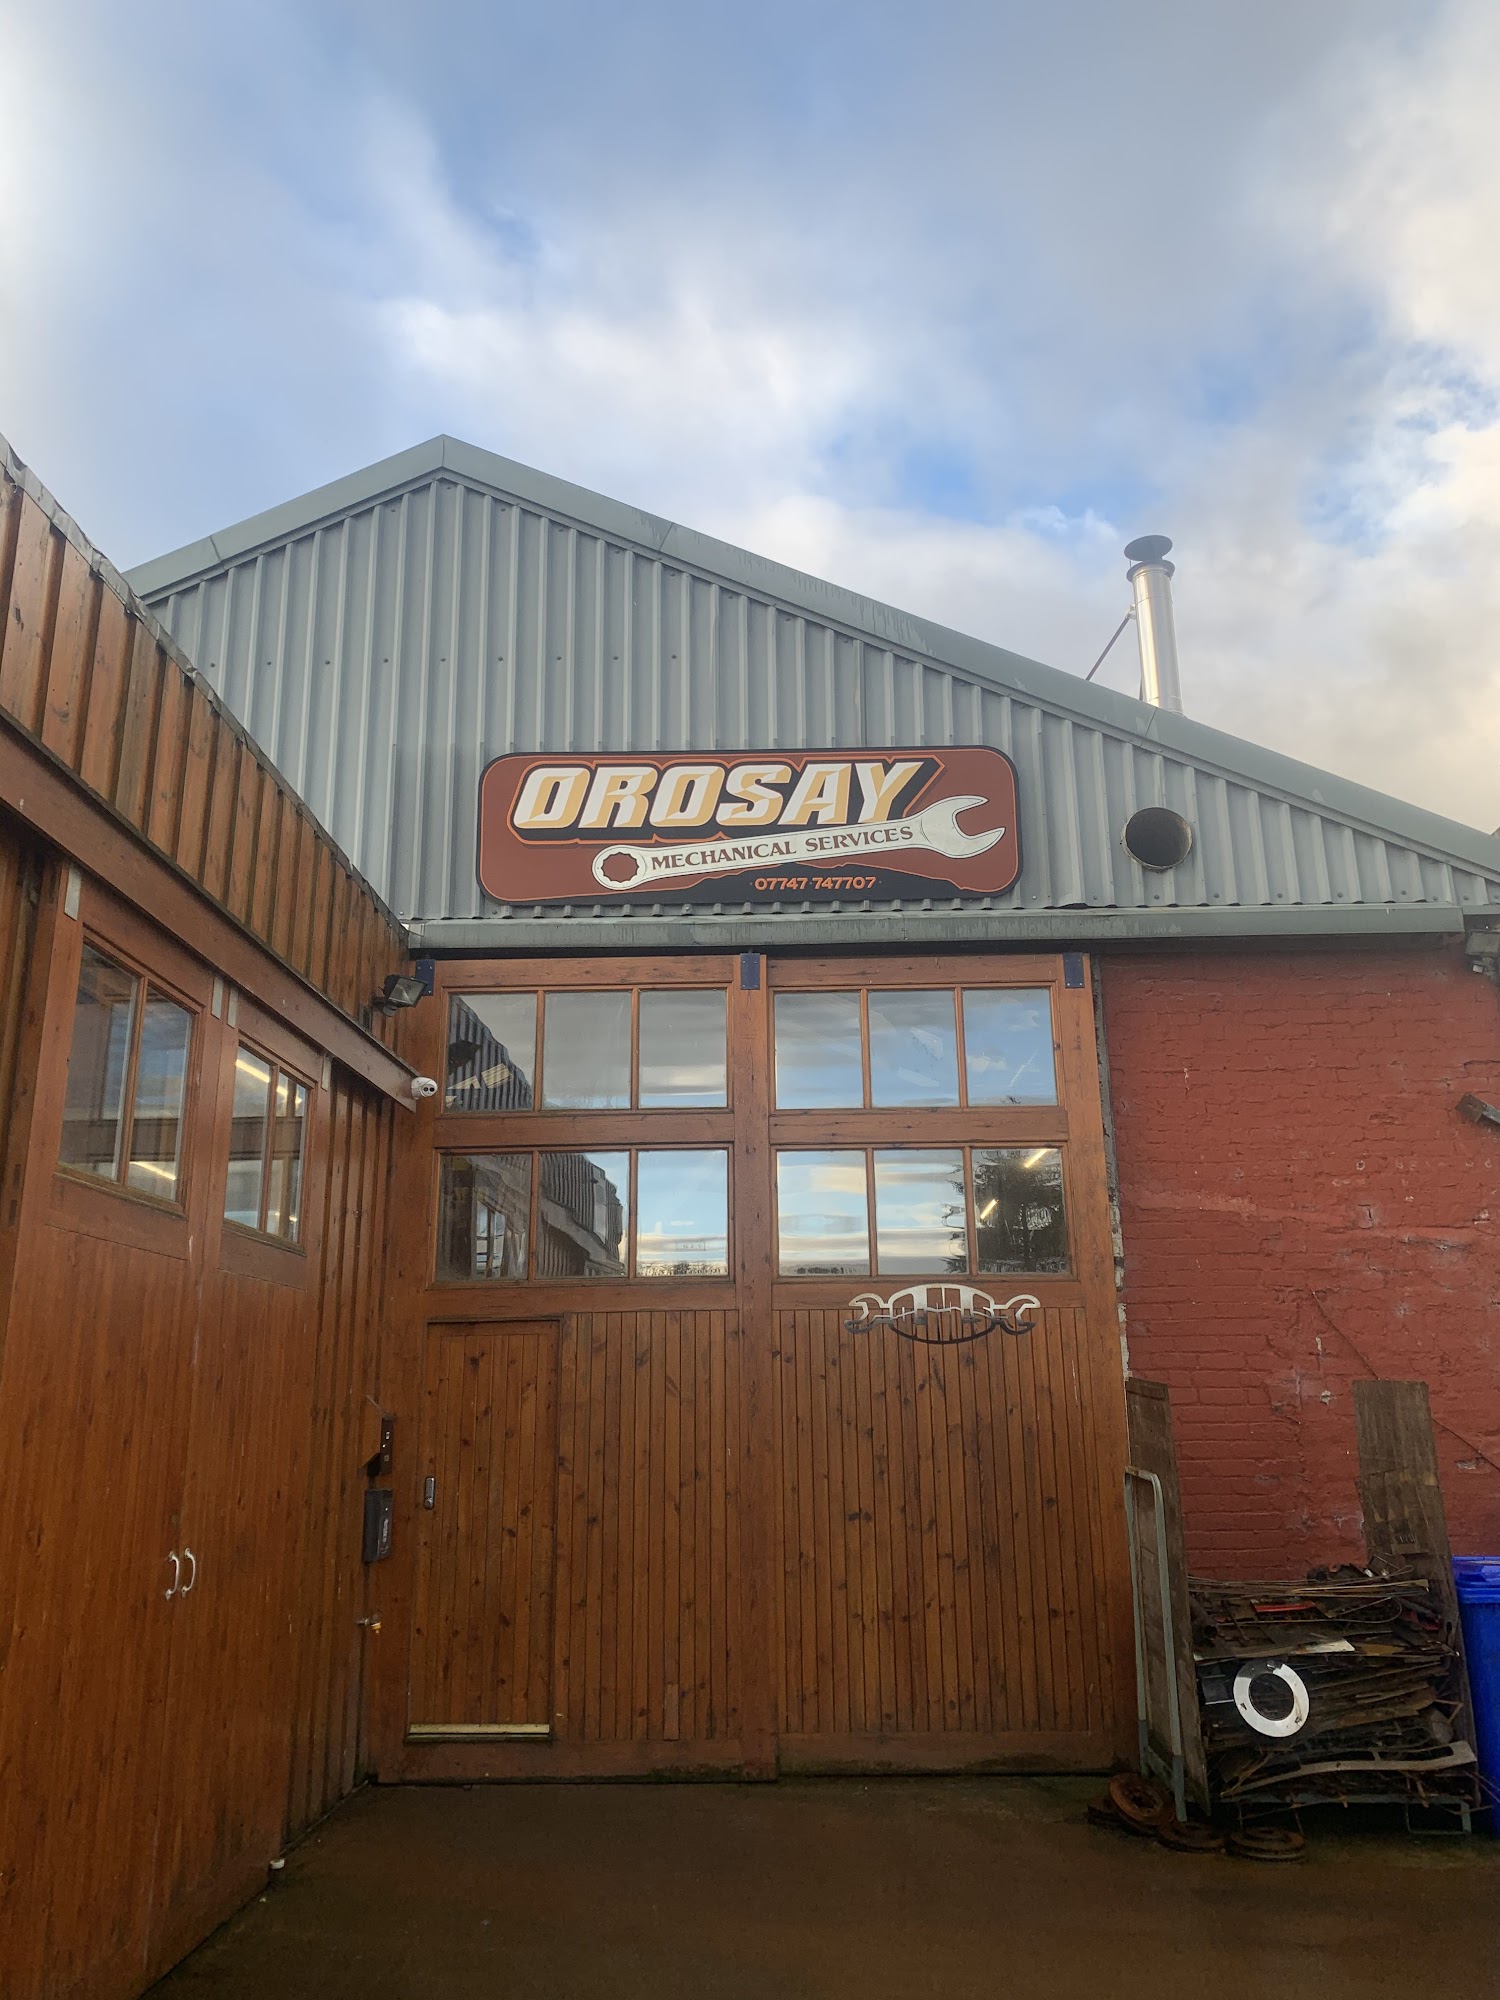 Orosay Mechanical Services